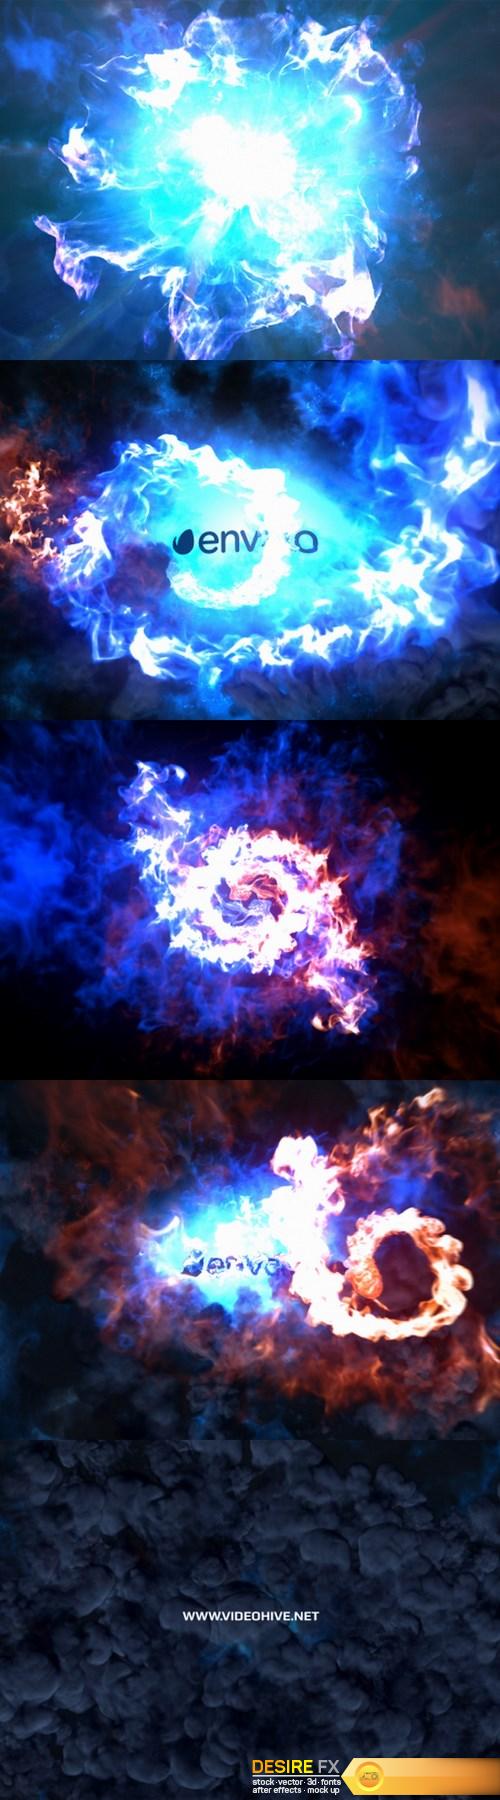 Videohive 19877205 fire and ice logo